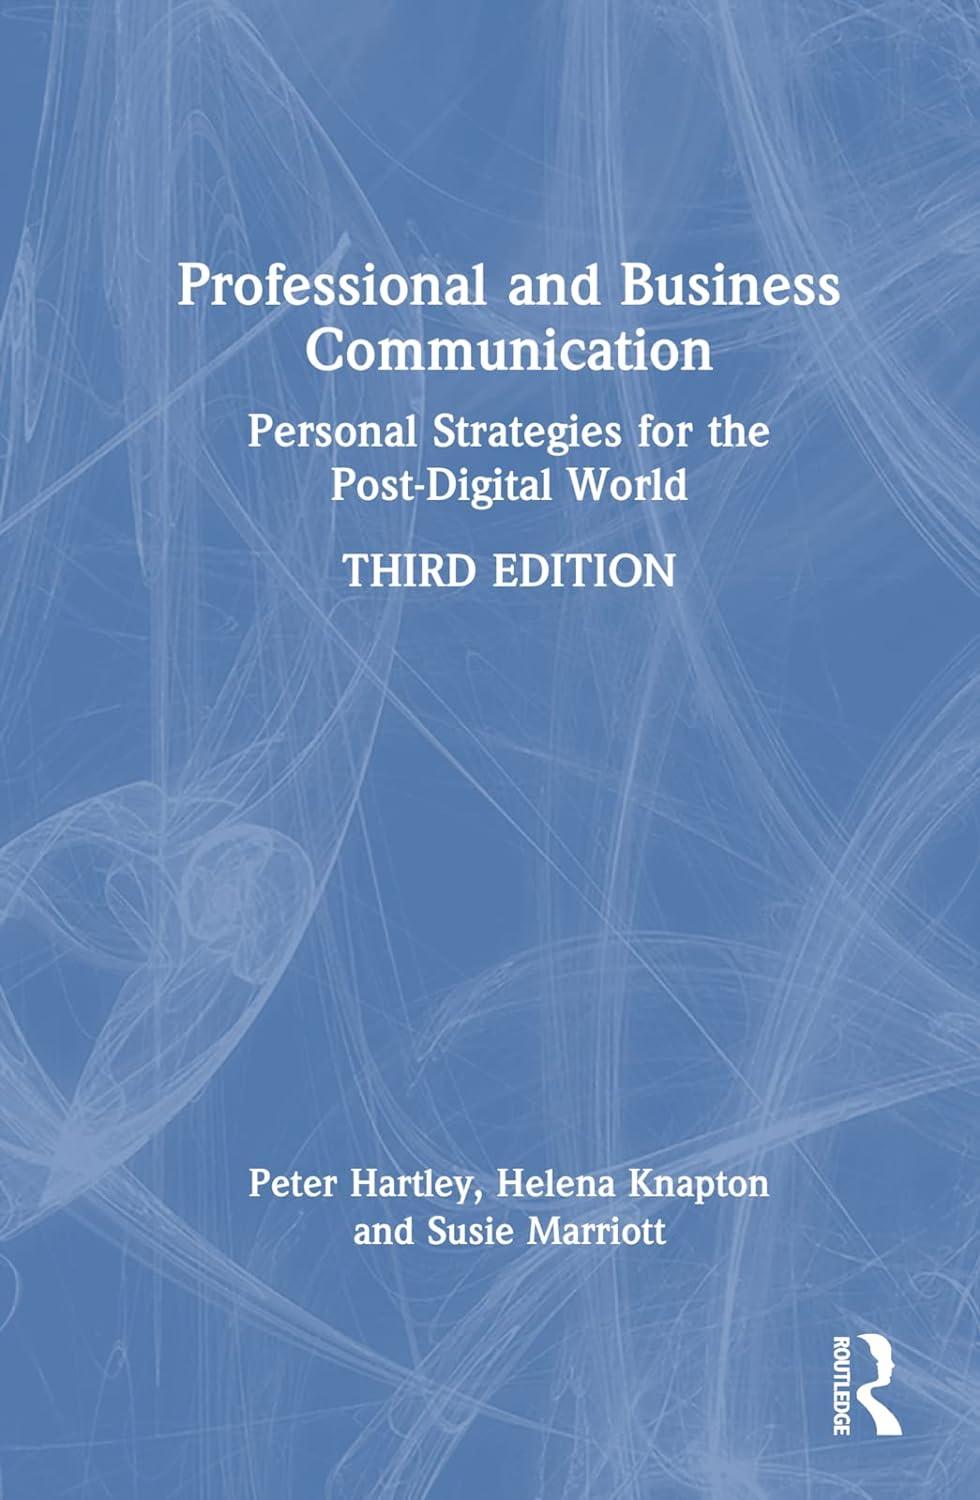 professional and business communication 3rd edition peter hartley, susie marriott, helena knapton 1032285869,